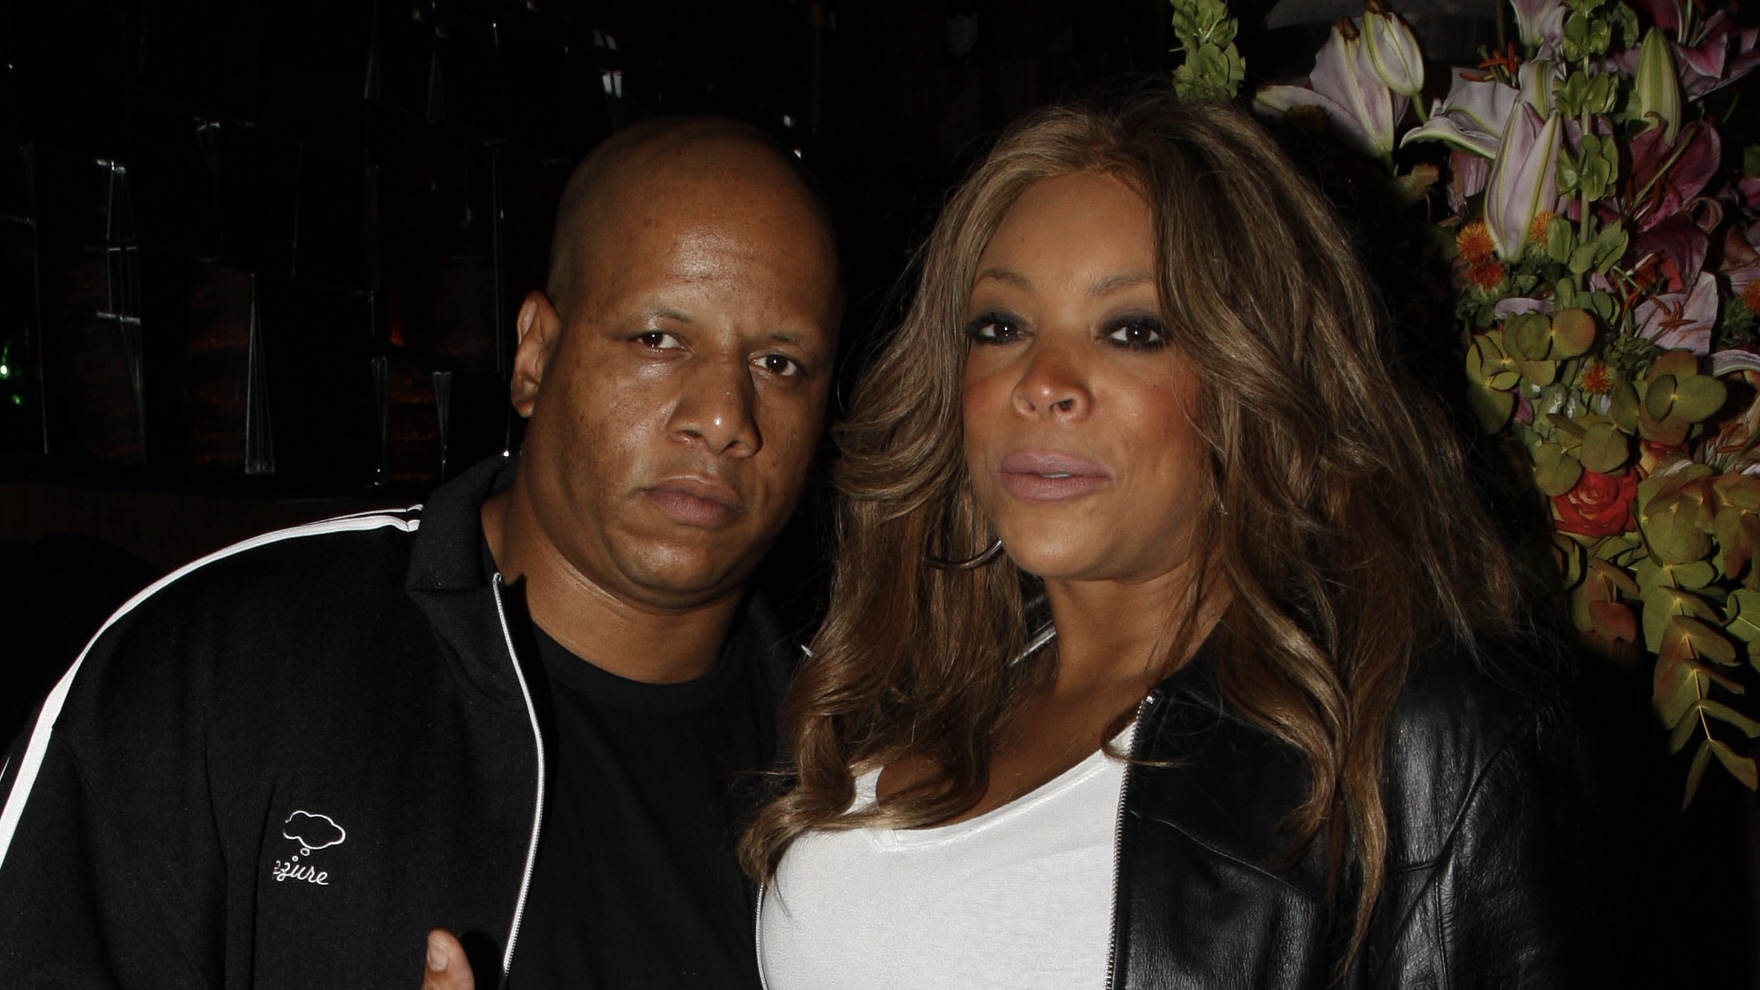 NEW YORK - SEPTEMBER 29: Kevin Hunter and Wendy Williams attend the Patron Music in Motion Tour Party at Marquee on September 29, 2008 in New York City.